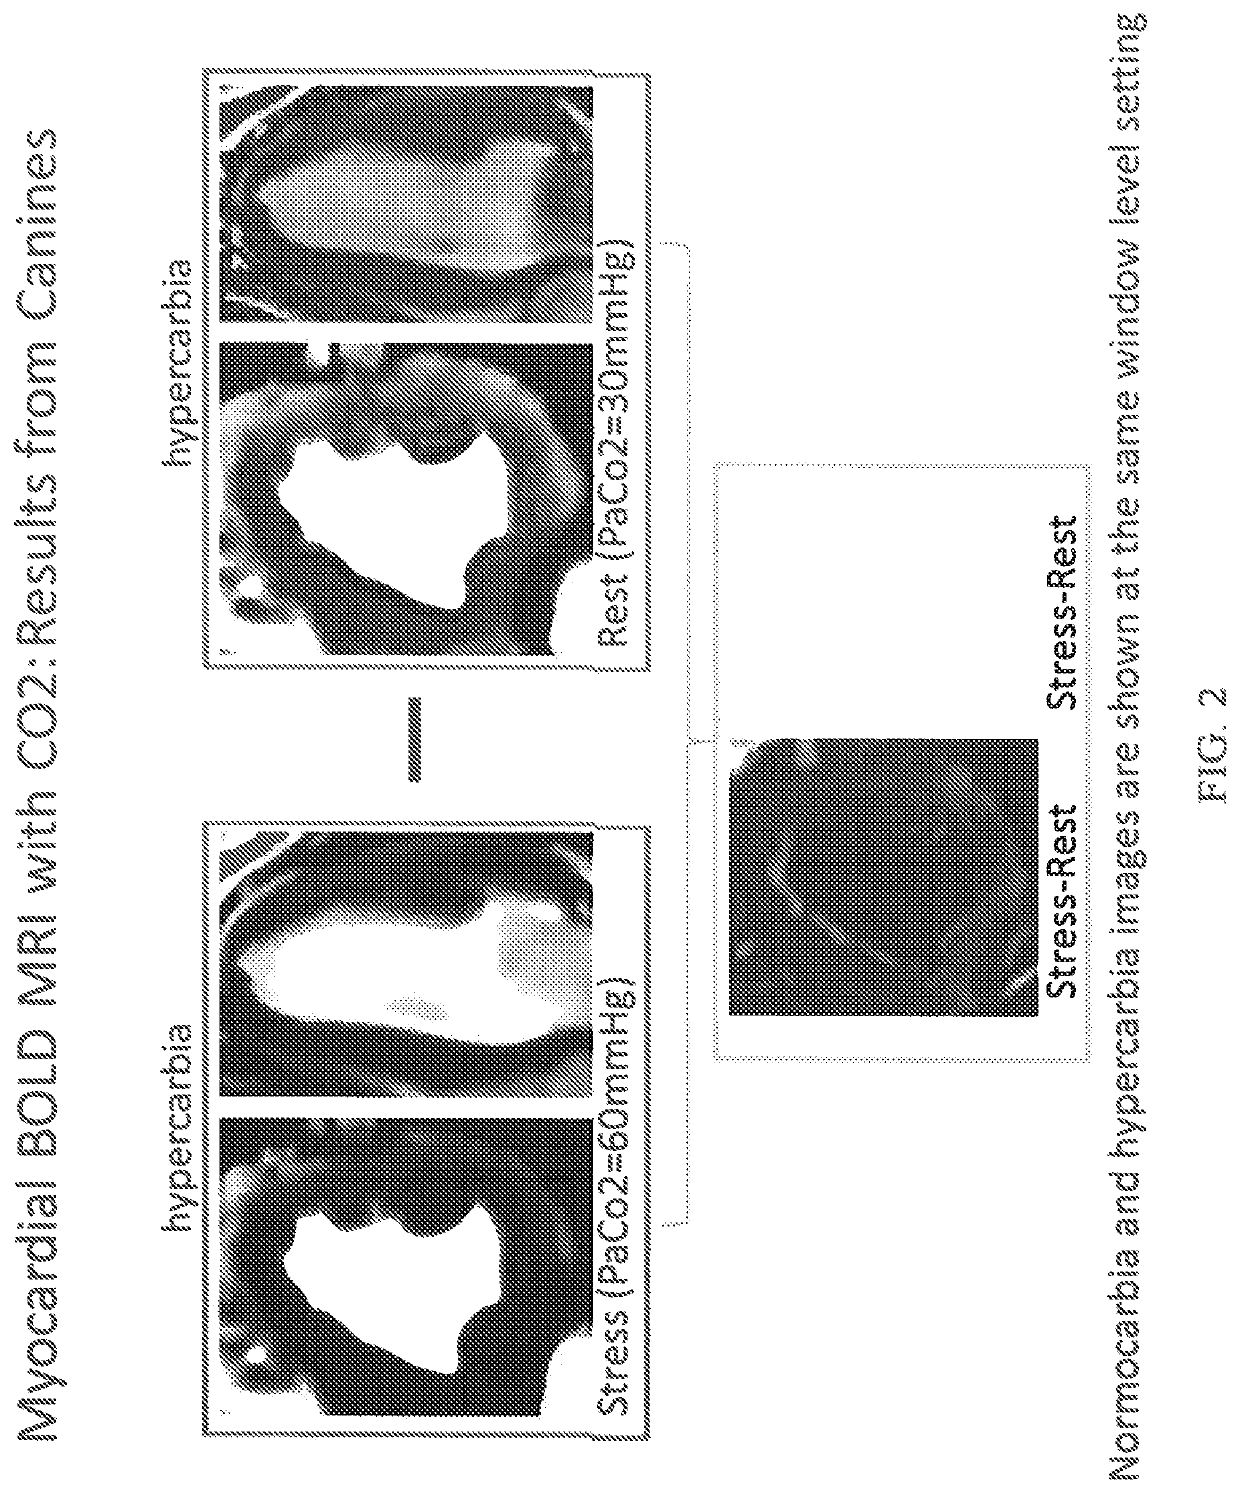 Assessment of coronary heart disease with carbon dioxide